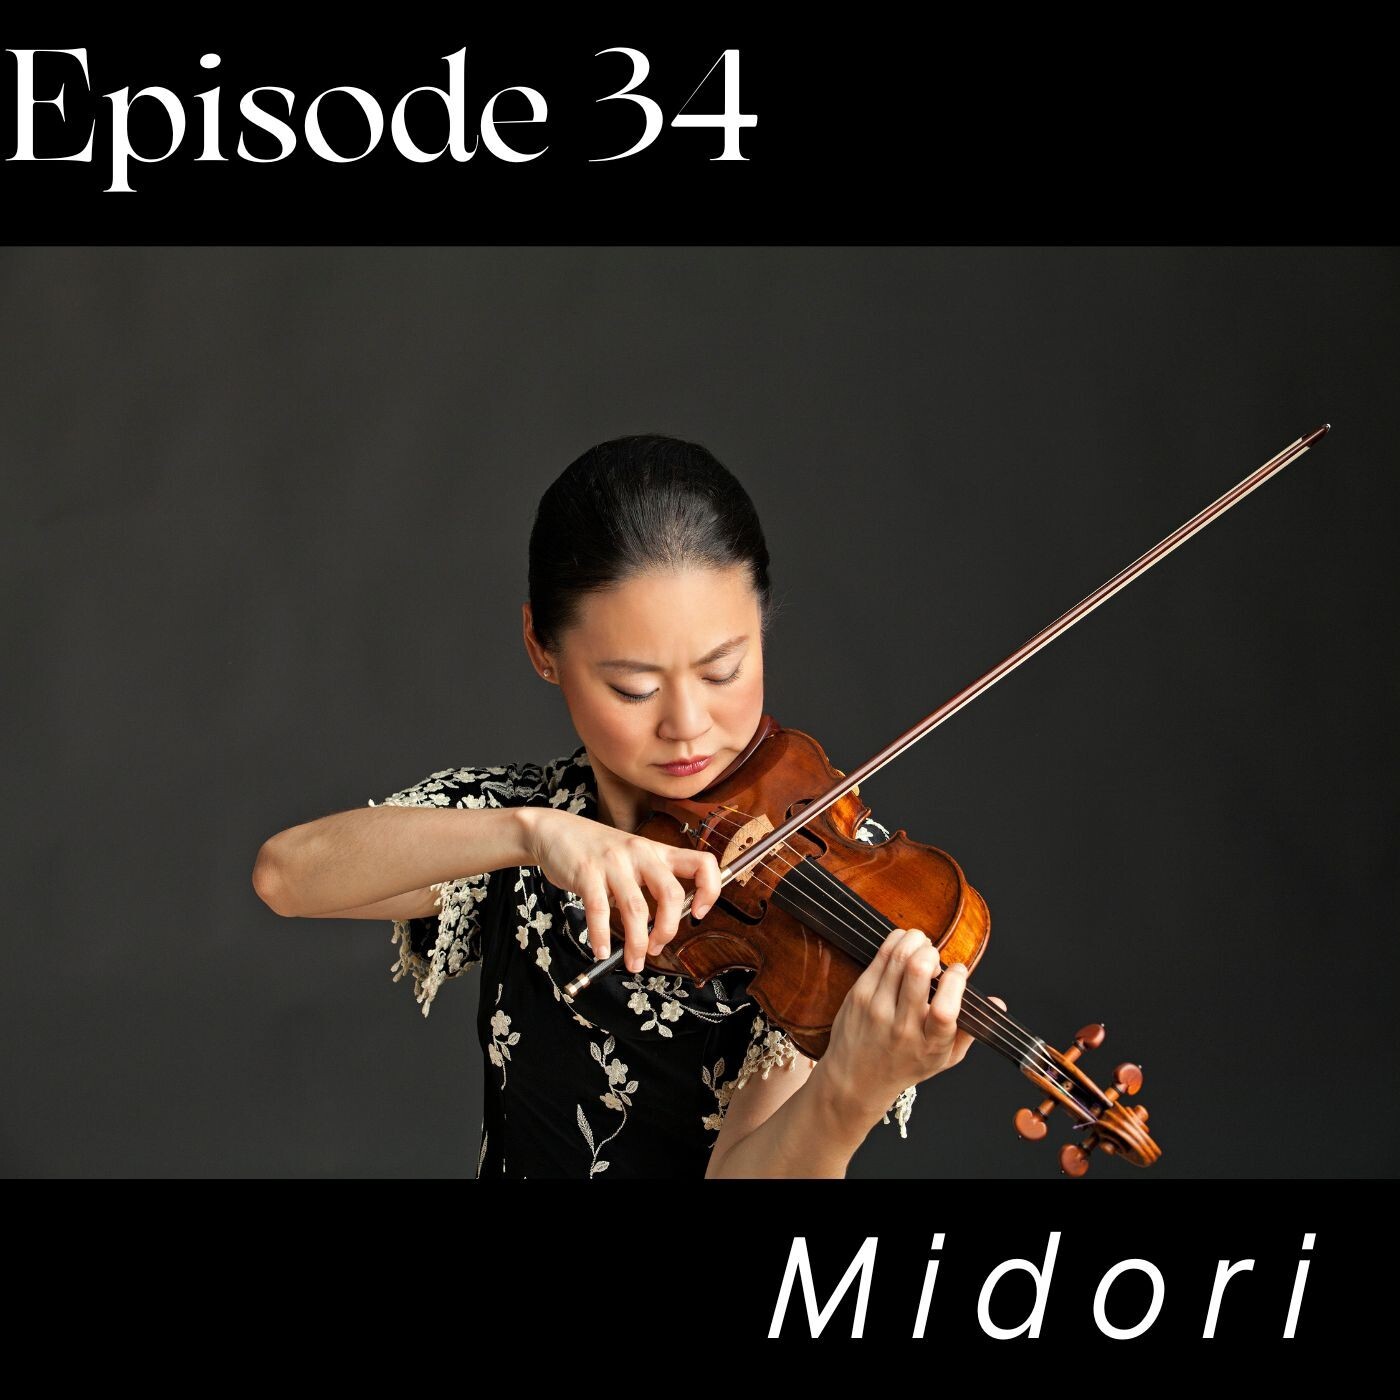 Episode 34: Midori - How to choose your career path